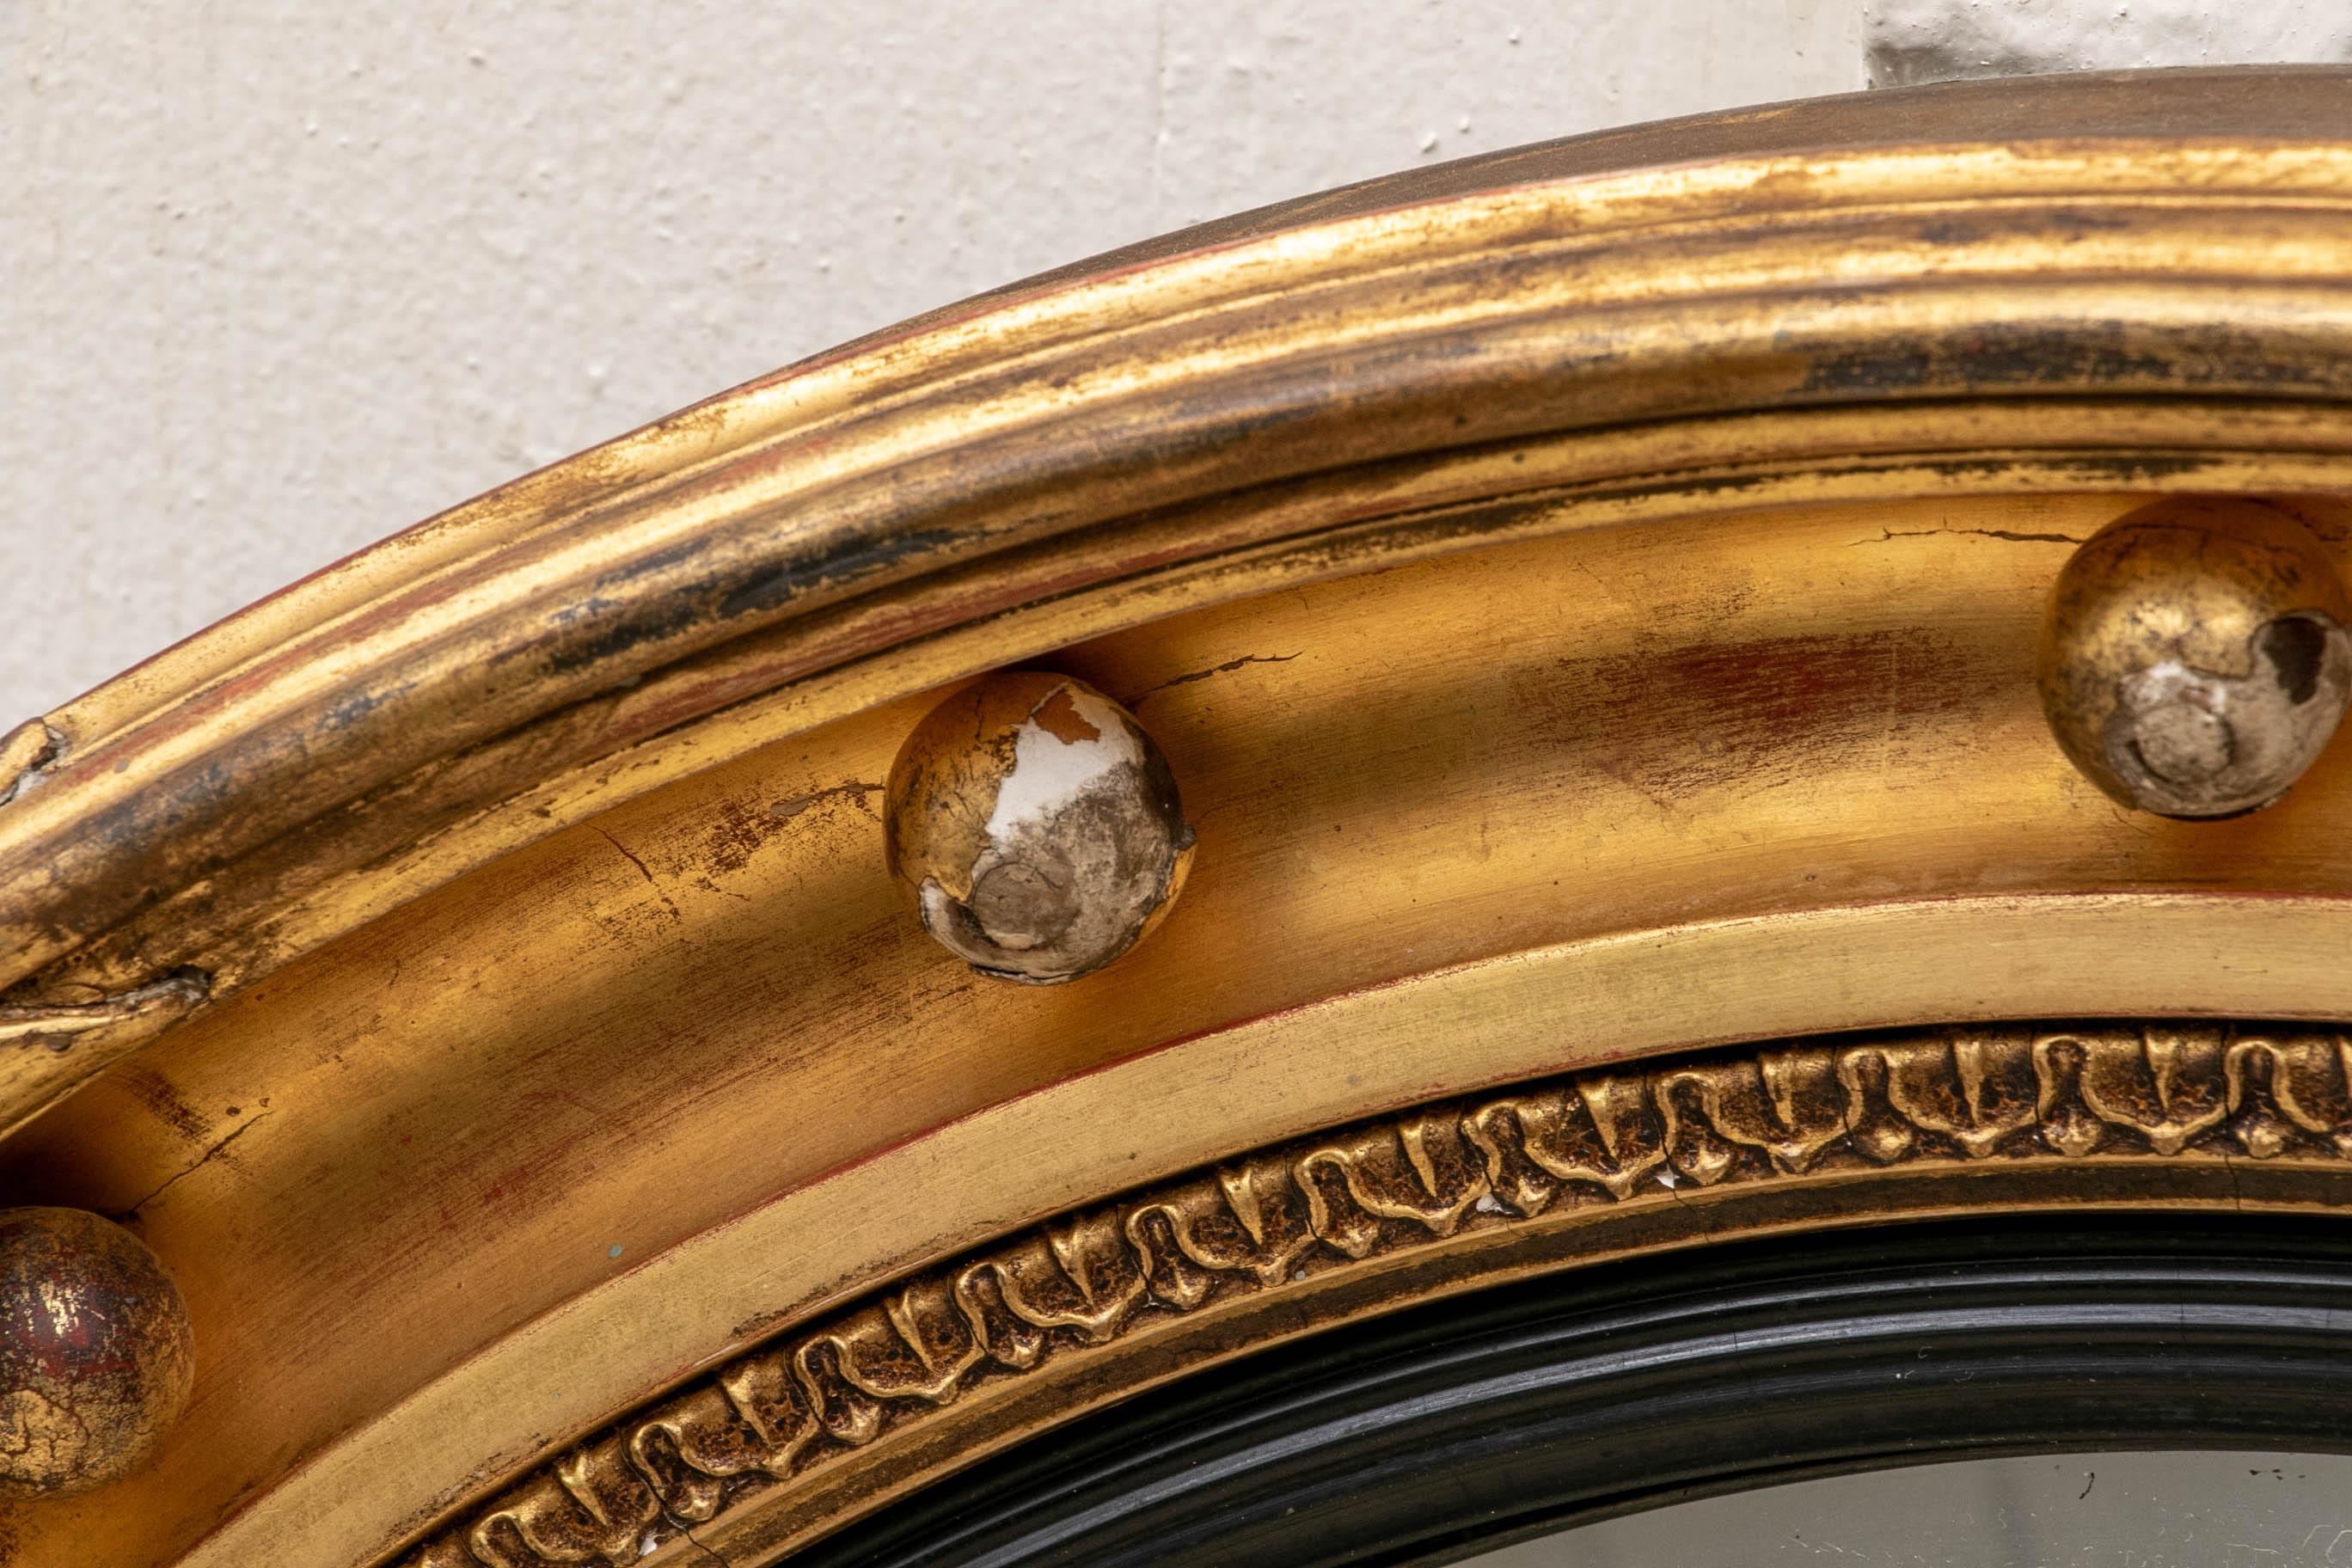 Antique gilt framed convex mirror, reeded outer surround with ribbon details, a middle one with spheres, an inner leafy band, and a reeded ebonized innermost surround.

Condition: Good condition with expected signs of use including some expected